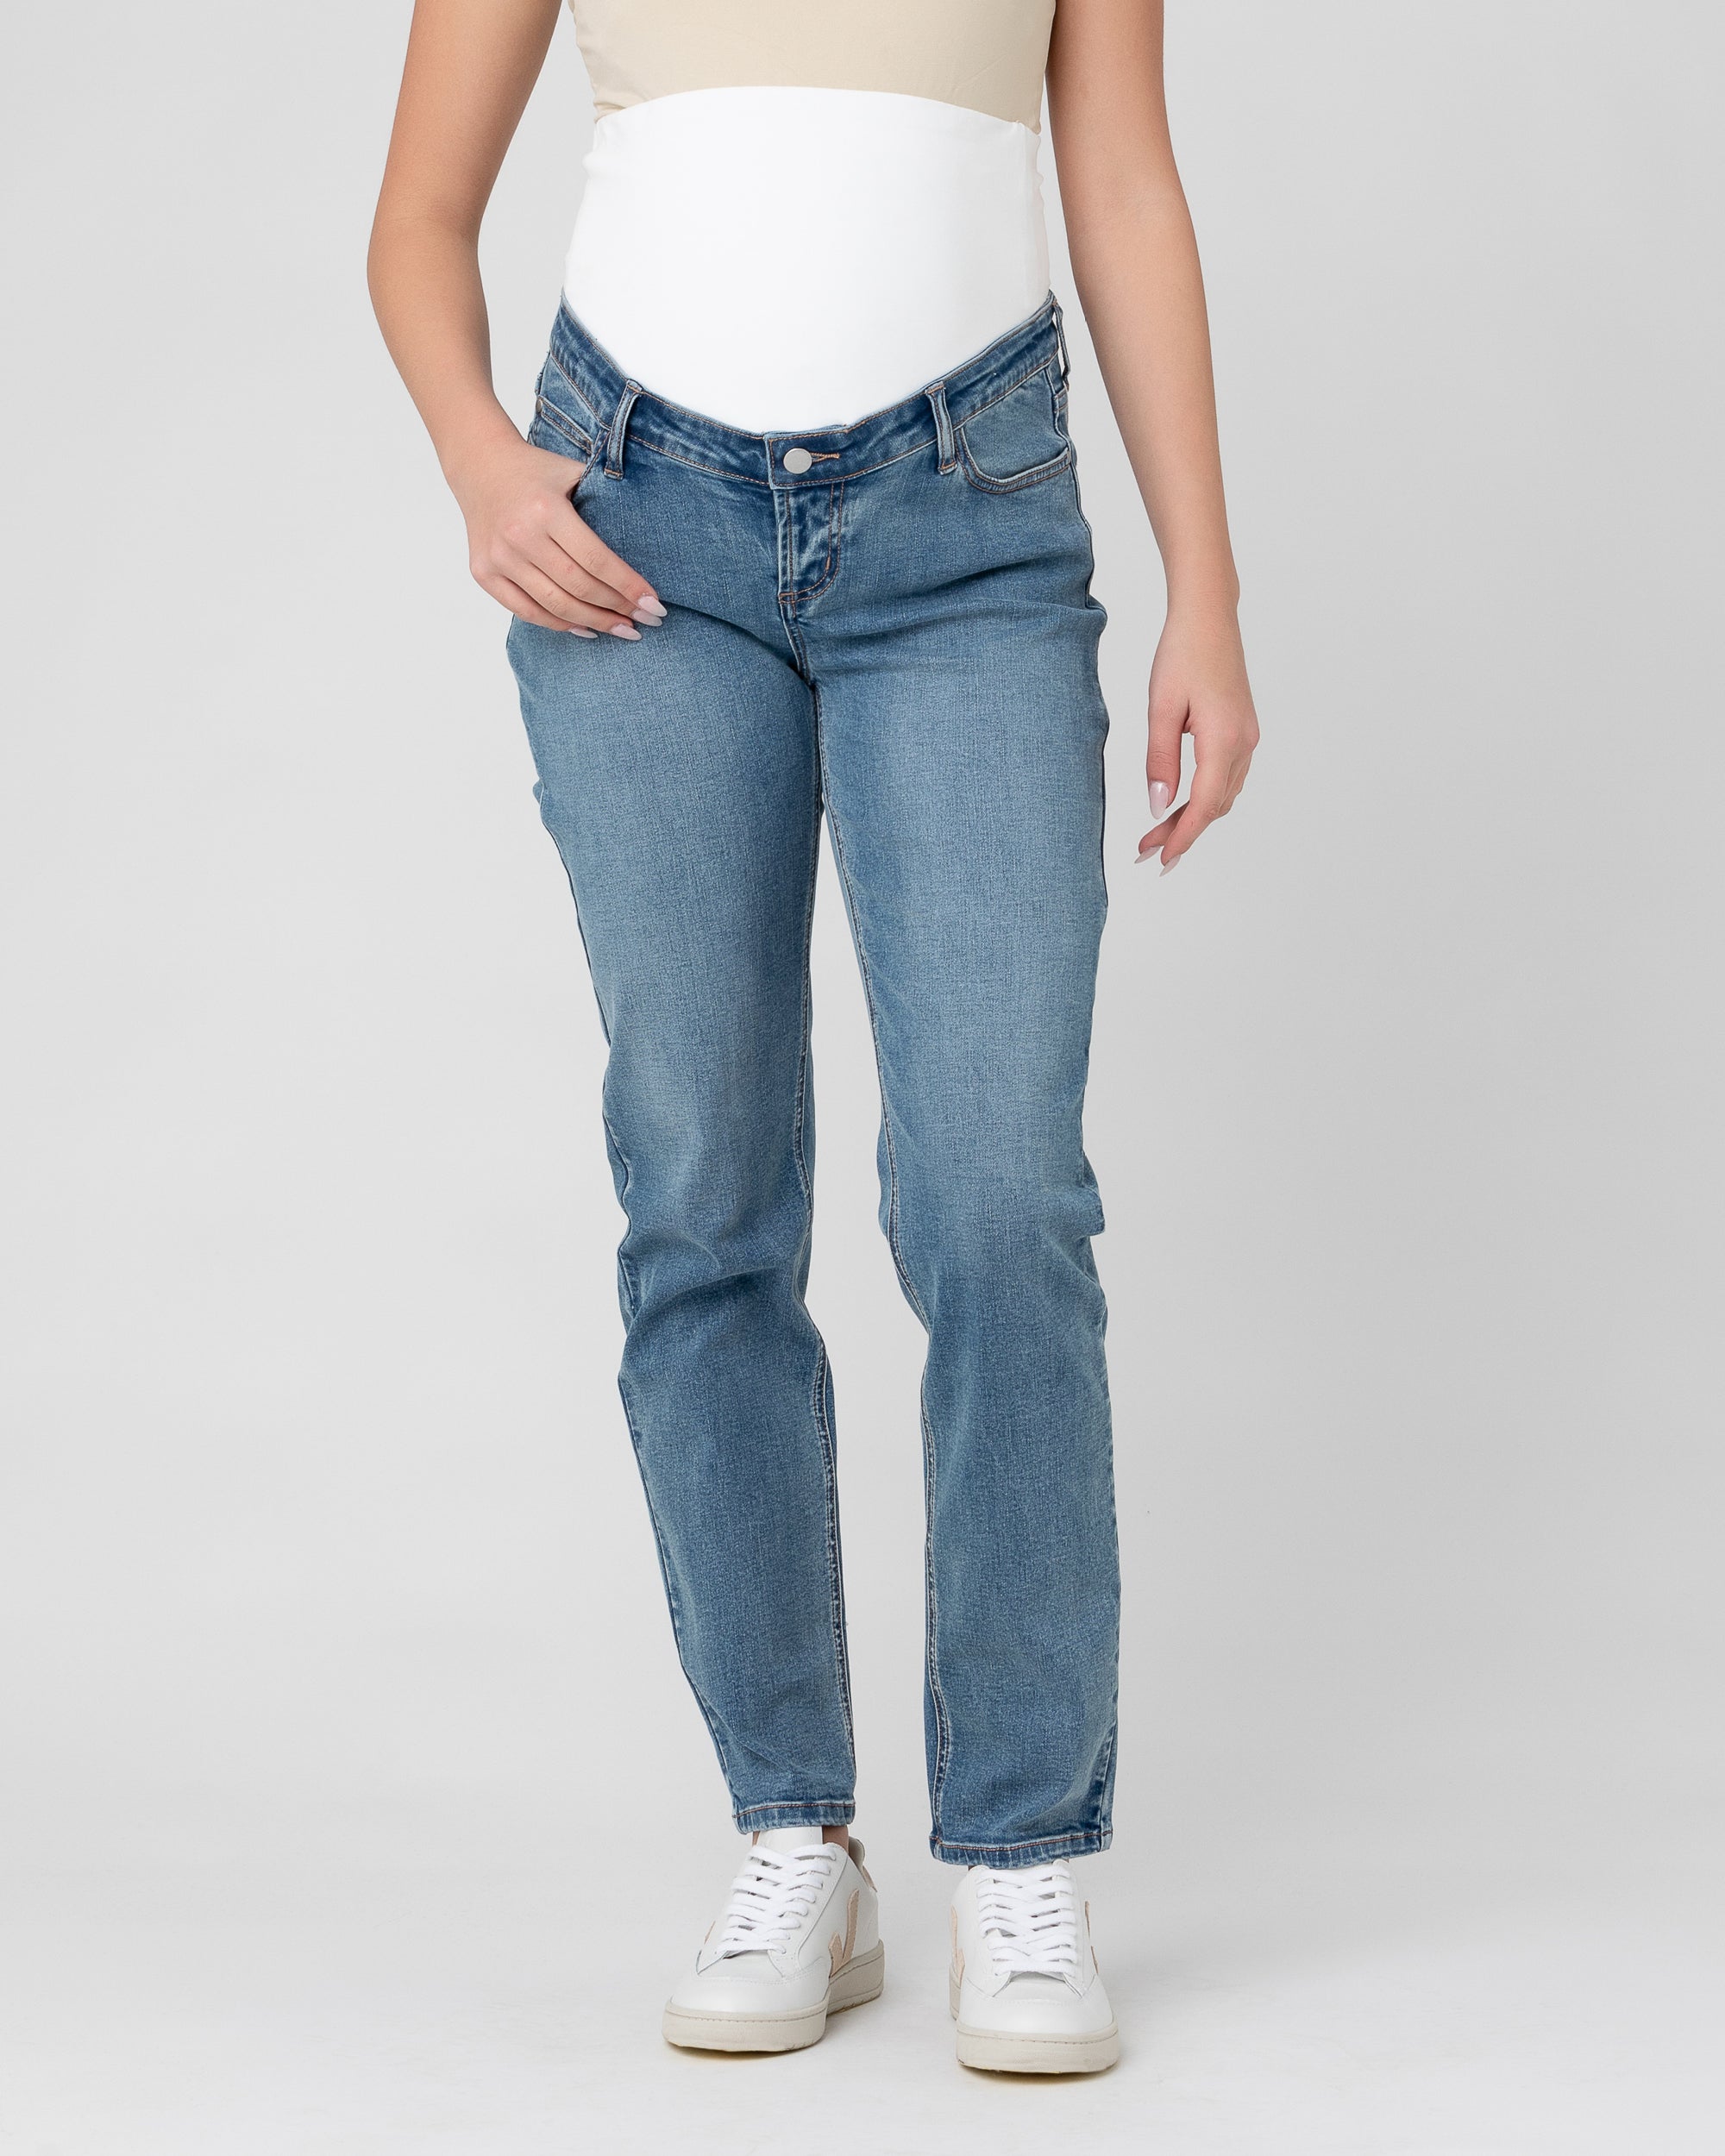 Maternity Denim Jeans With Ripped Design For Nursing And Comfortable Belly  Thick Maternity Leggings From Bakacutie, $21.04